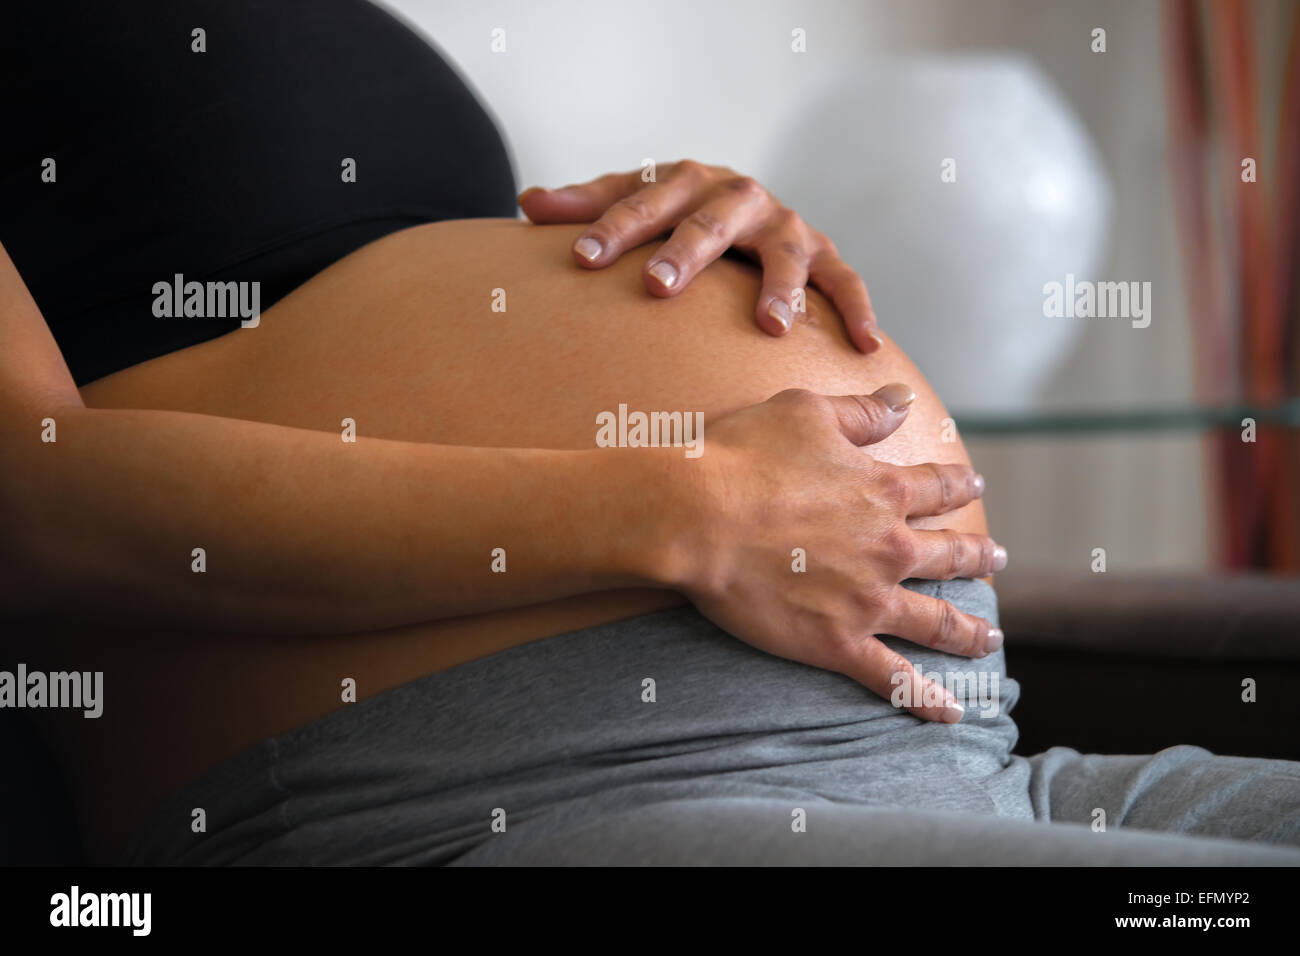 Baby bump, image de 8 mois pregnant woman sitting on a couch holding her belly Banque D'Images